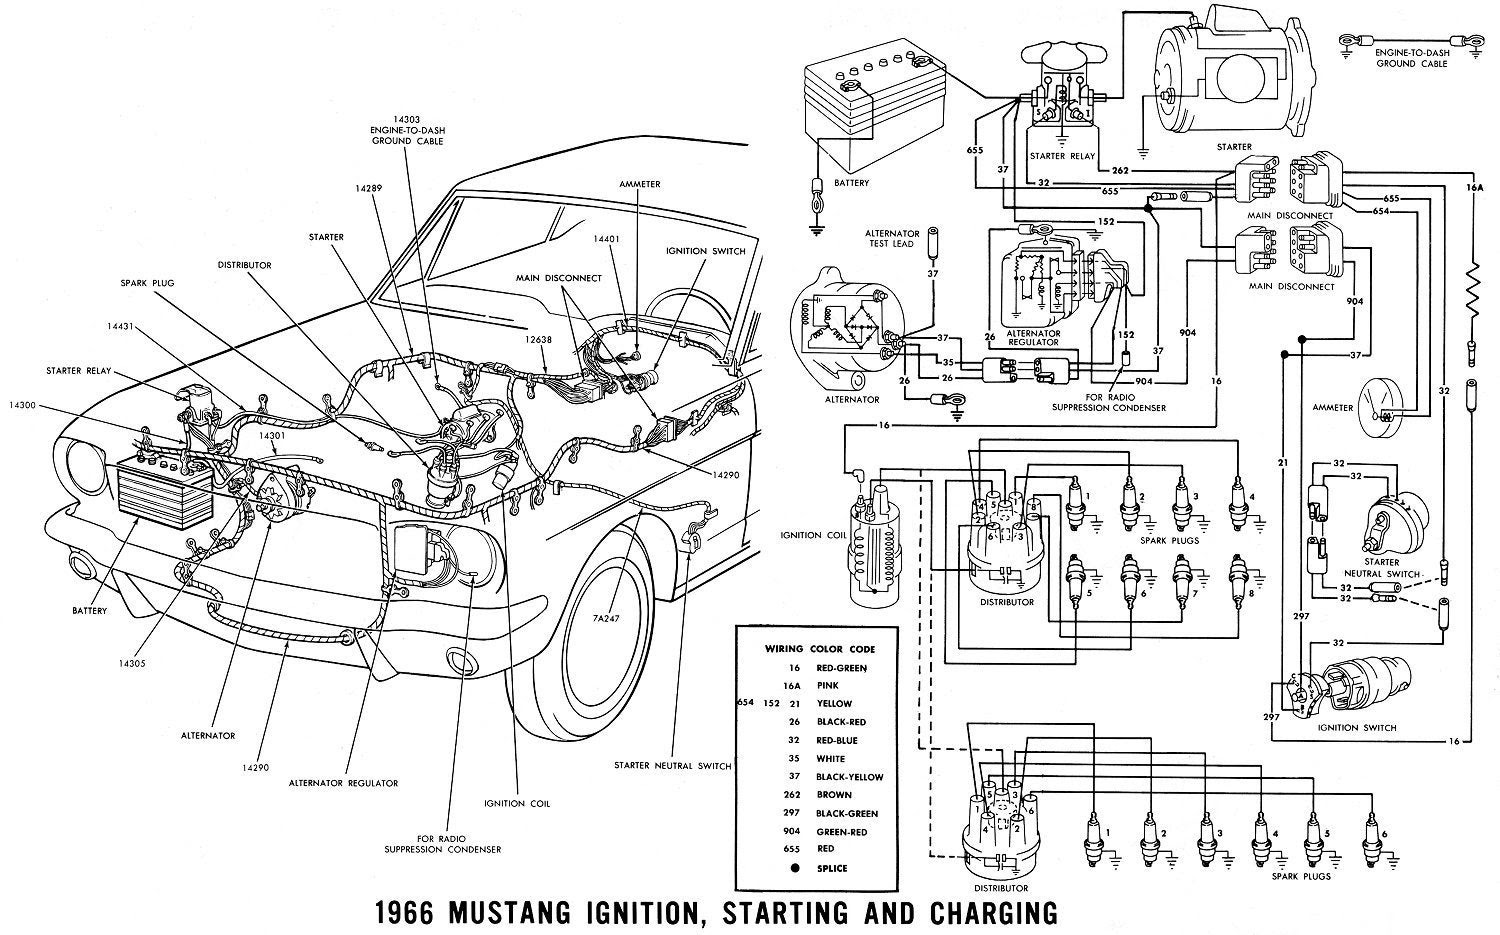 1966 Mustang Ignition Switch Diagram - What Pins are What ...